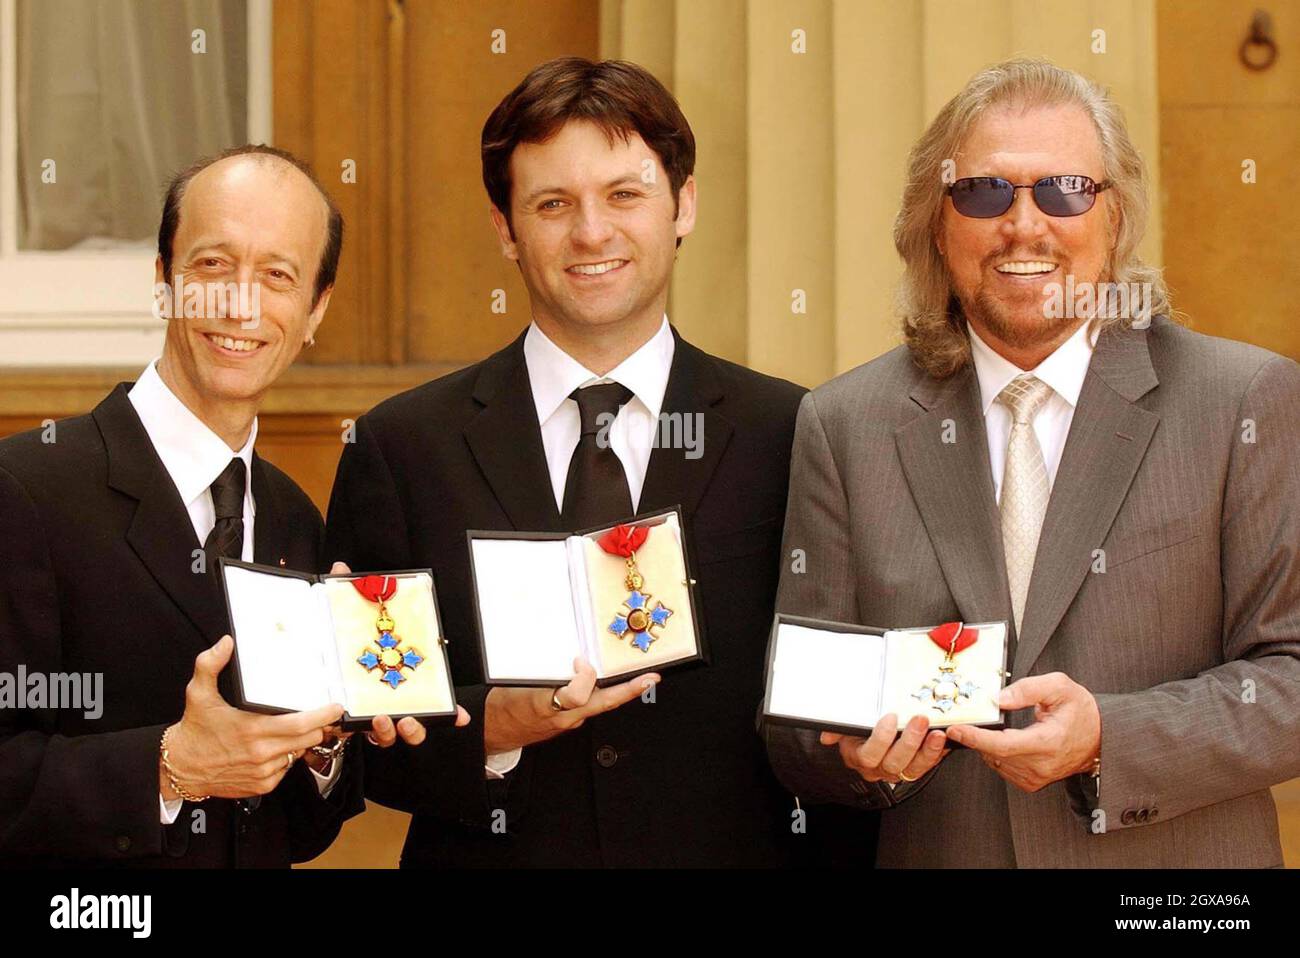 The two surviving members of the Bee Gees, Robin Gibb (left) and Barry Gibb (right) hold their CBE's along with Adam Gibb who received the honour on behalf of his father, the late Maurice Gibb, at Buckingham Palace, London, Thursday May 27, 2004. All three brothers were awarded CBE's although Maurice Gibb died last year before he could receive the honour  Stock Photo